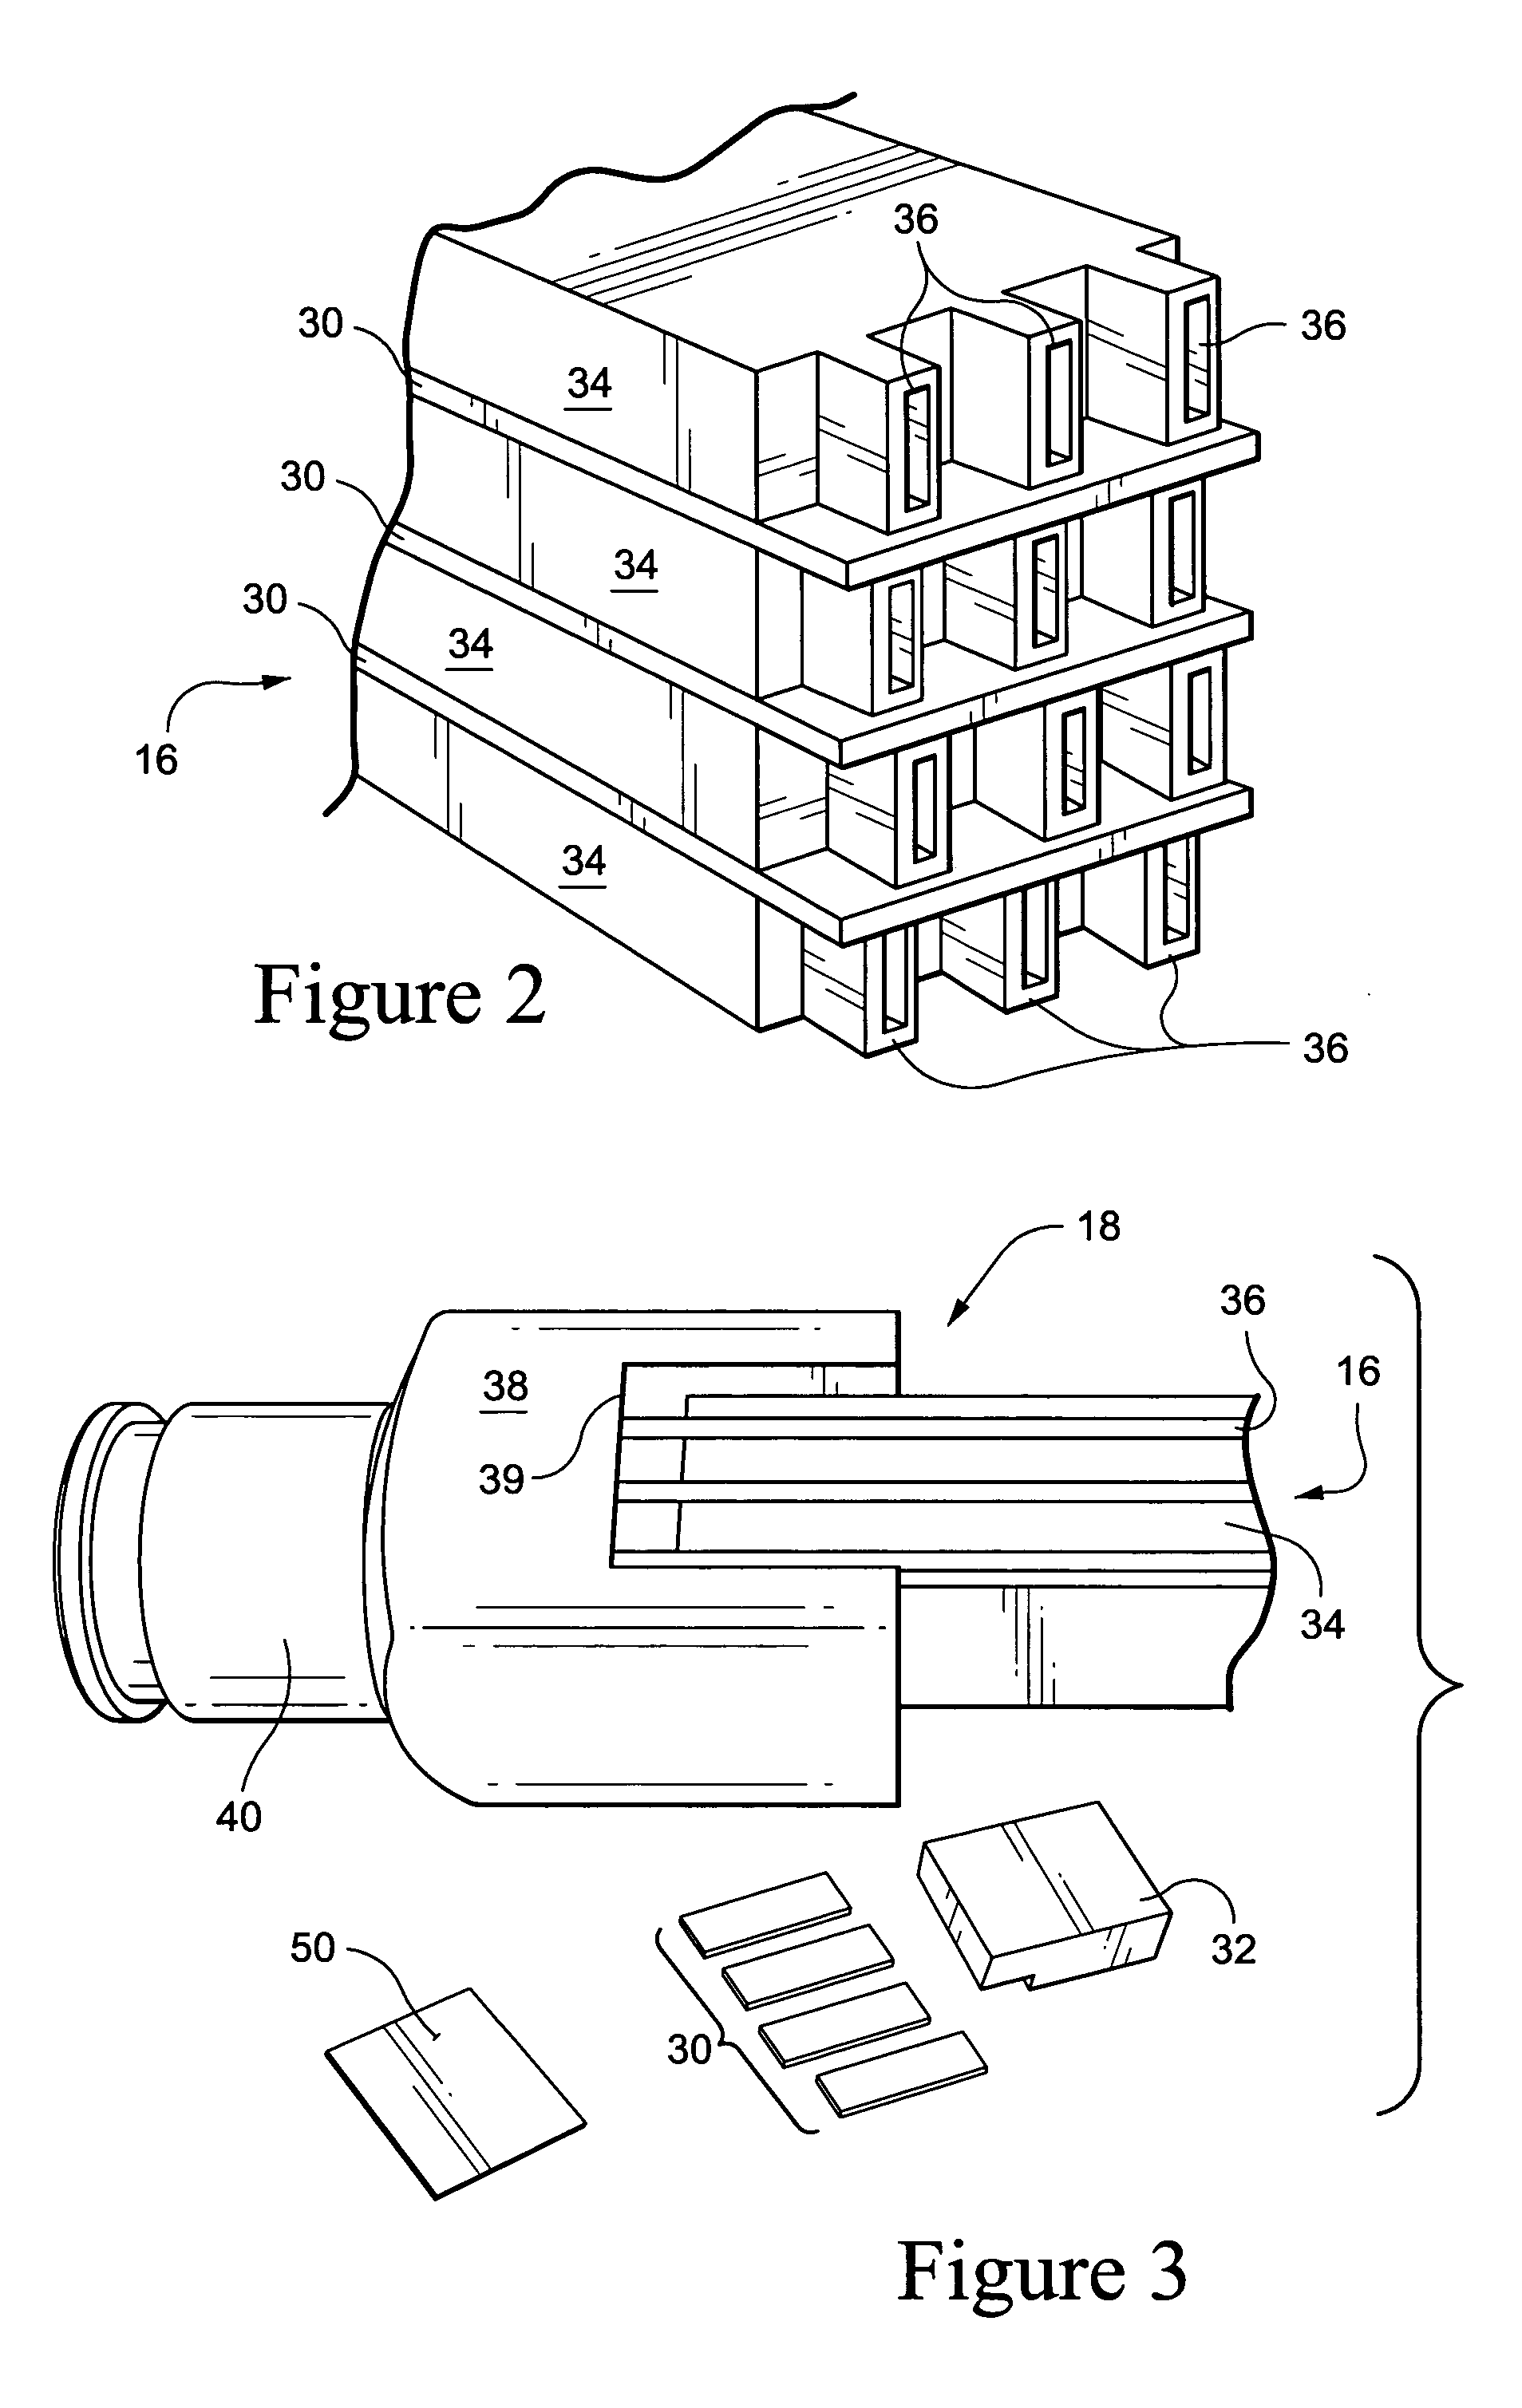 Method and system for applying an isolation layer to a brazed end of a generator armature winding bar